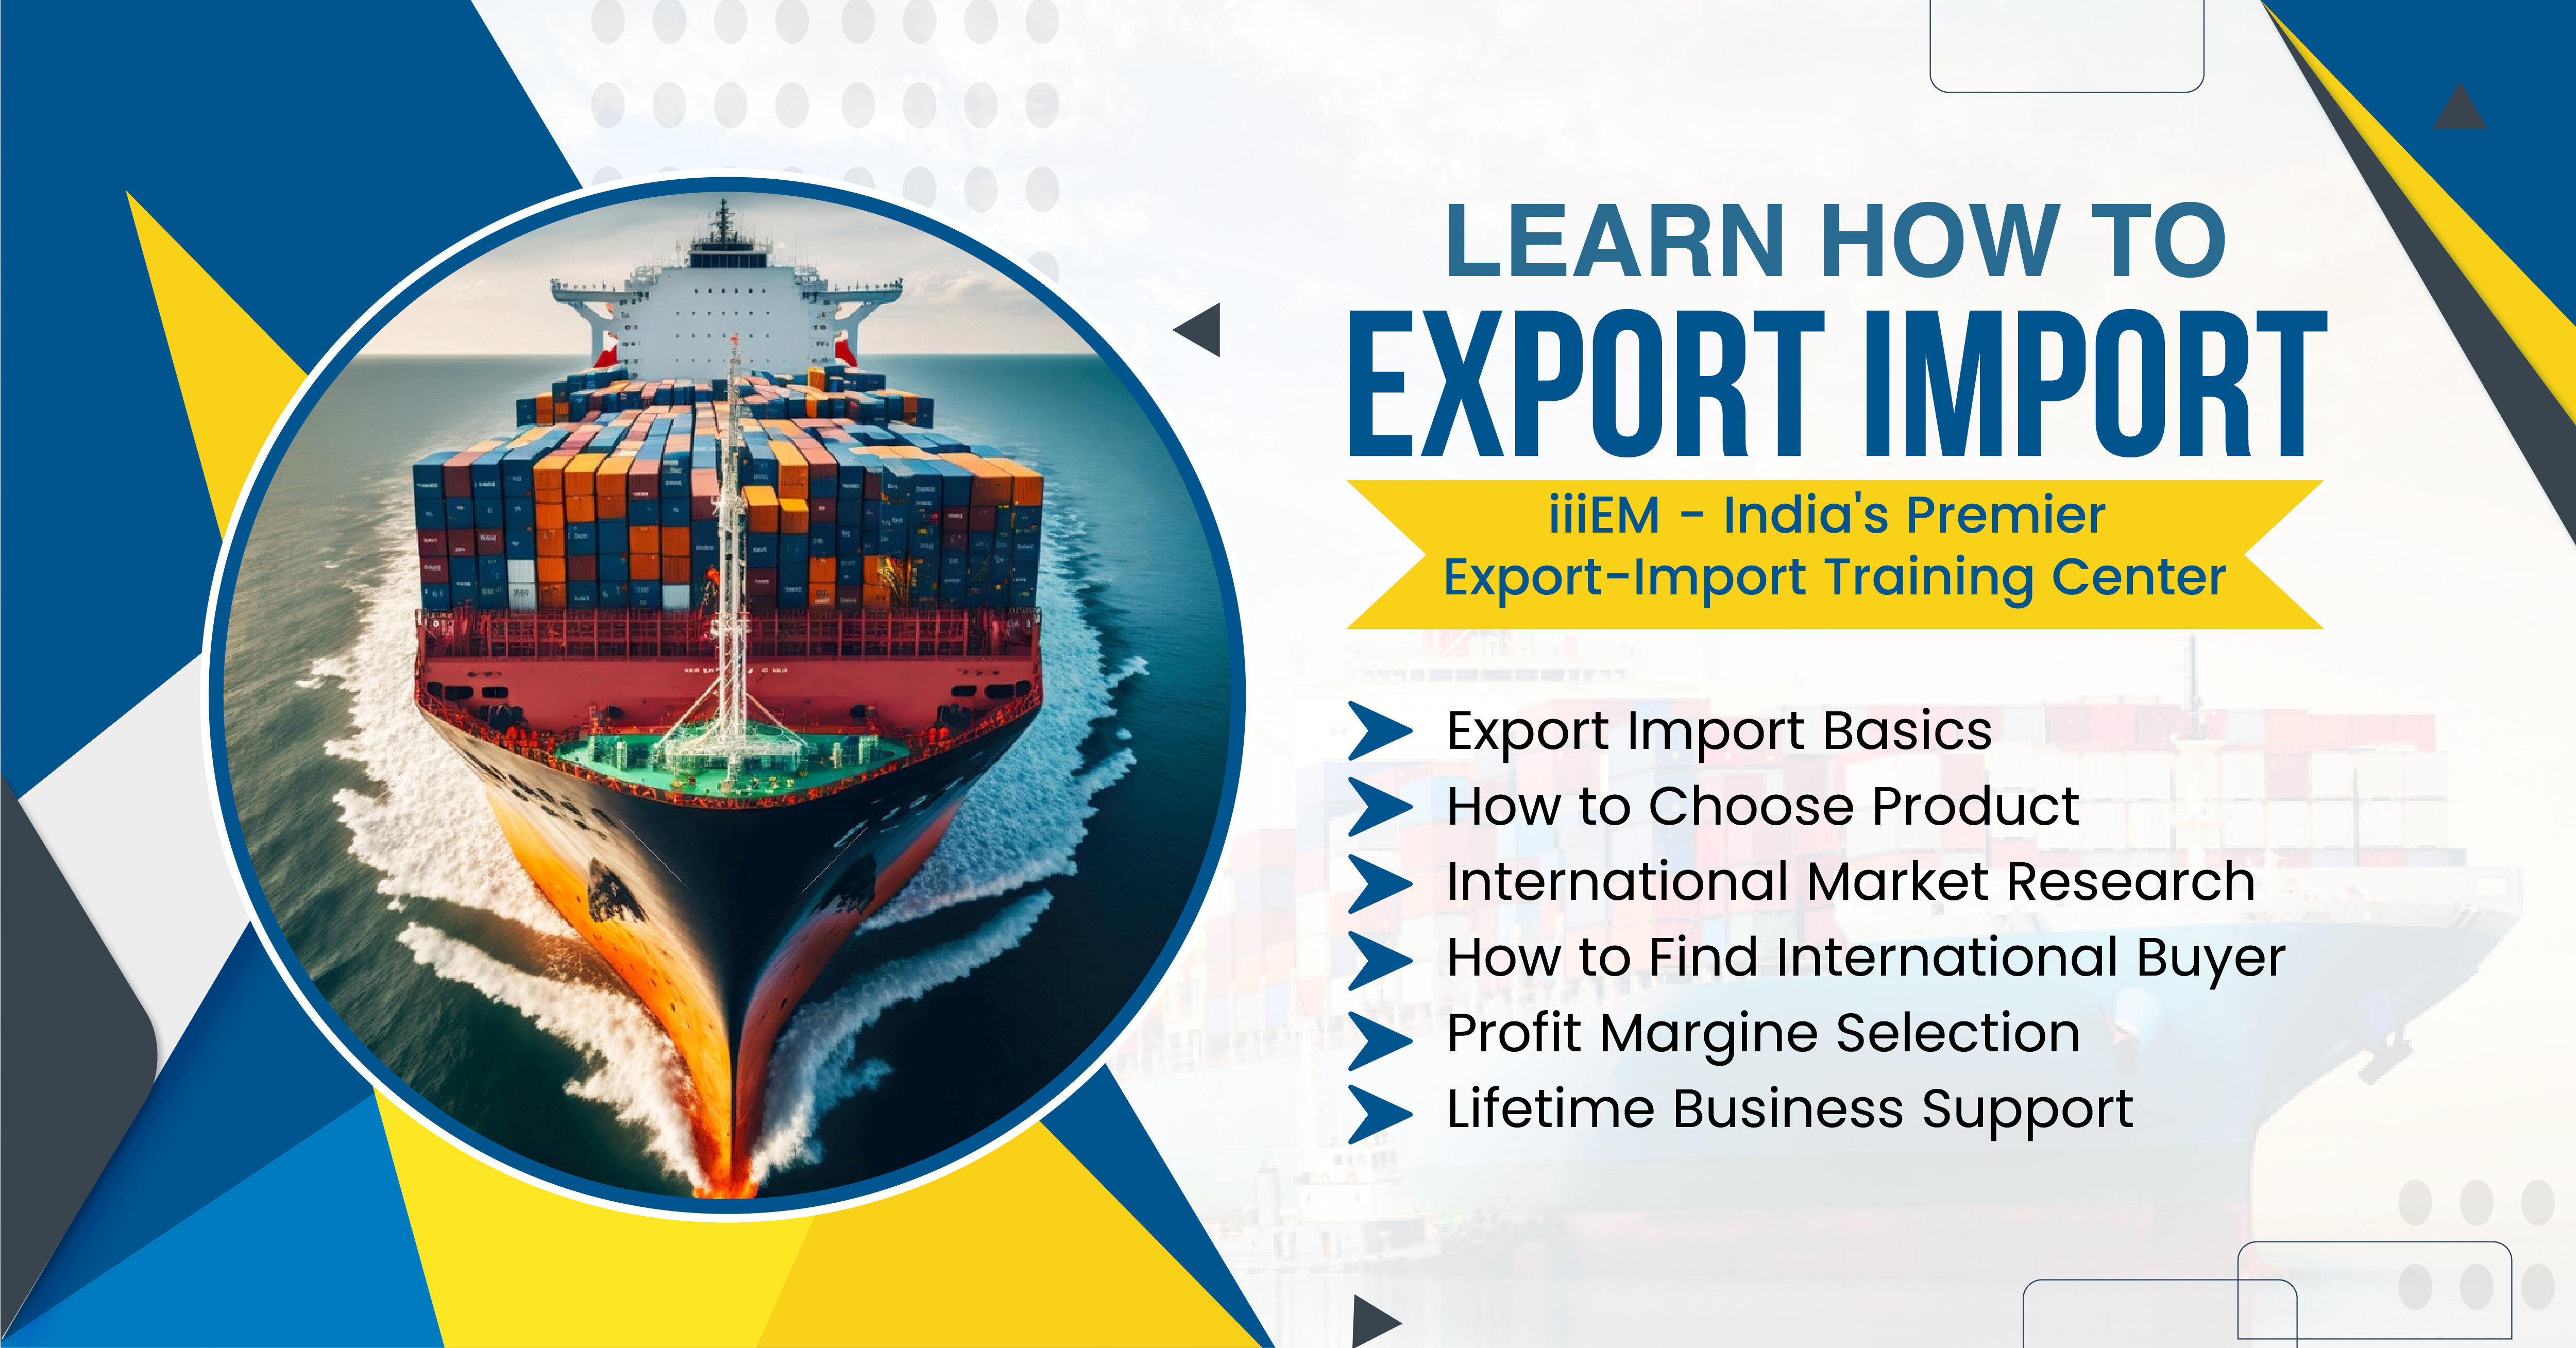 Enroll Now! Learn How to Export-Import with Certified Course Training in Vadodara, Vadodara, Gujarat, India